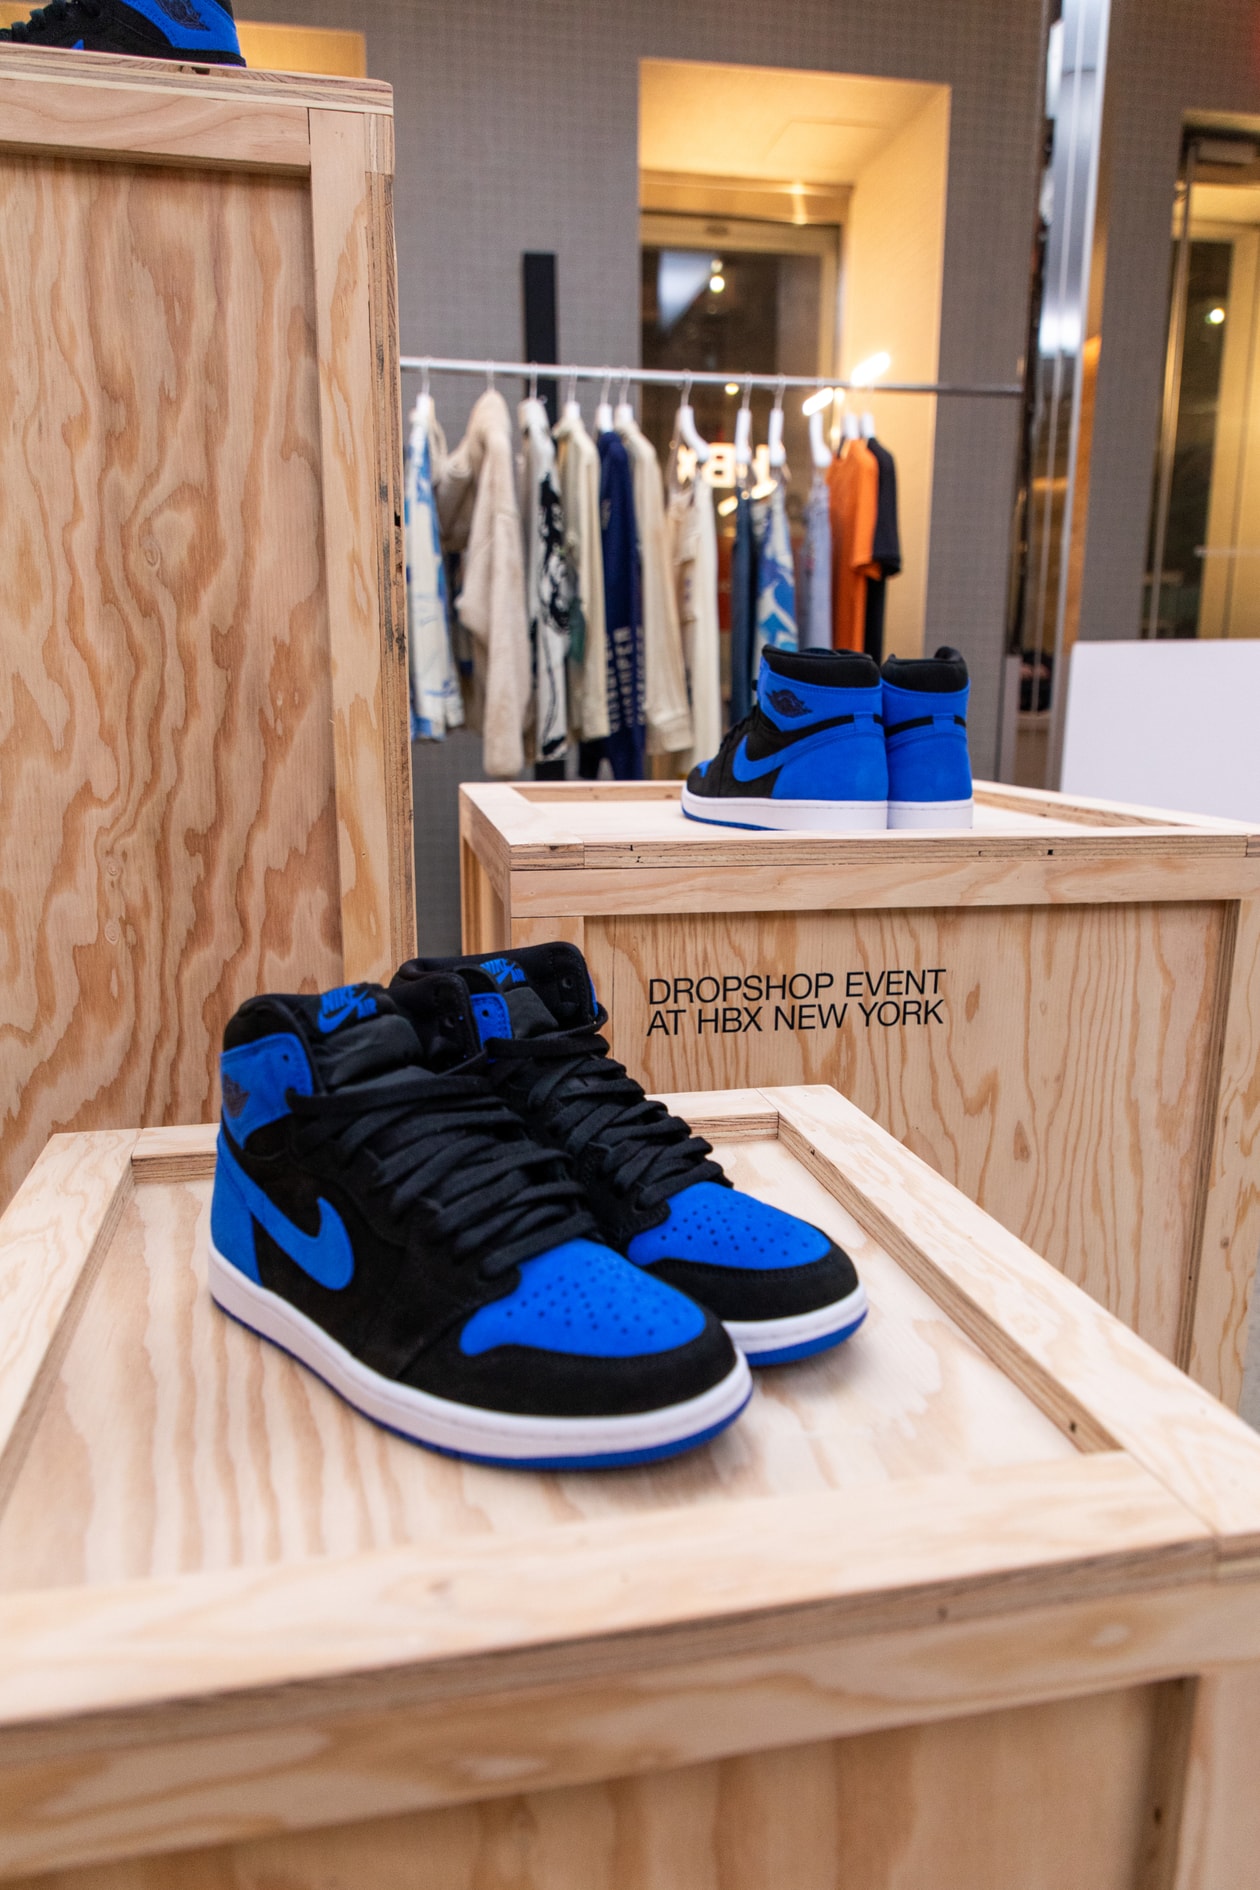 Afterpay Brings Dropshop IRL with Sneaker Event at HBX New York